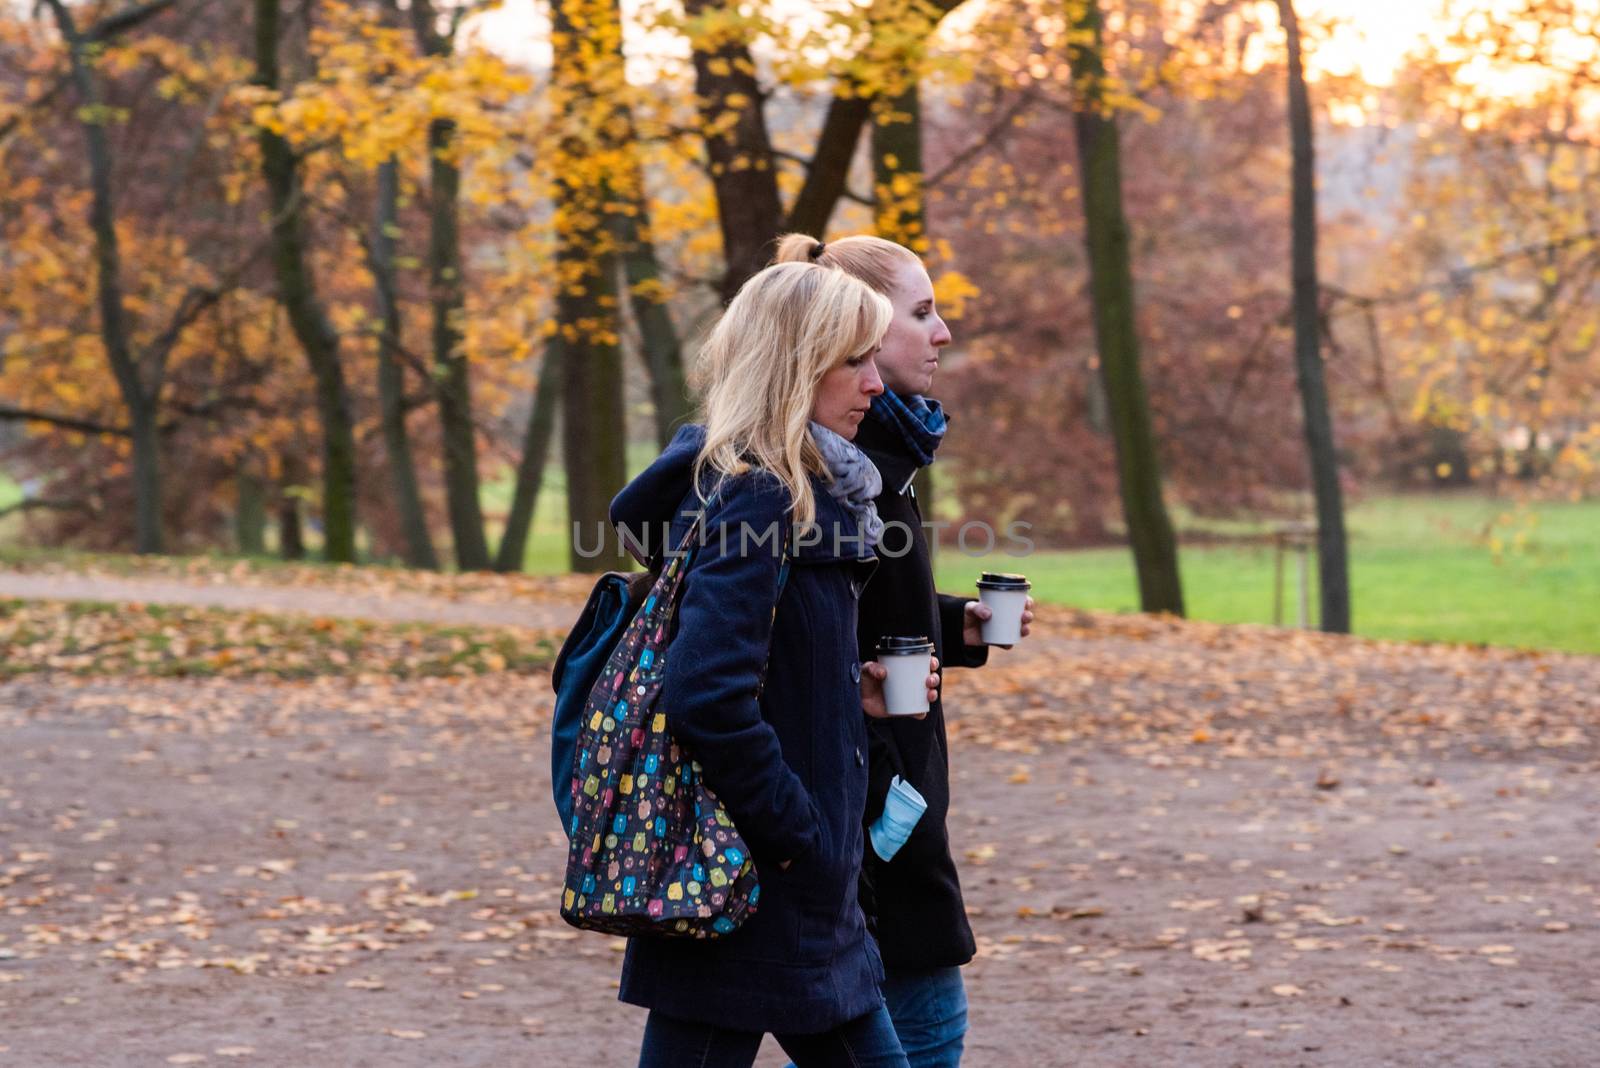 11/14/2020. Park Stromovka. Prague czech Republic. Two women is walking in the park on a Sunday winter day. by gonzalobell